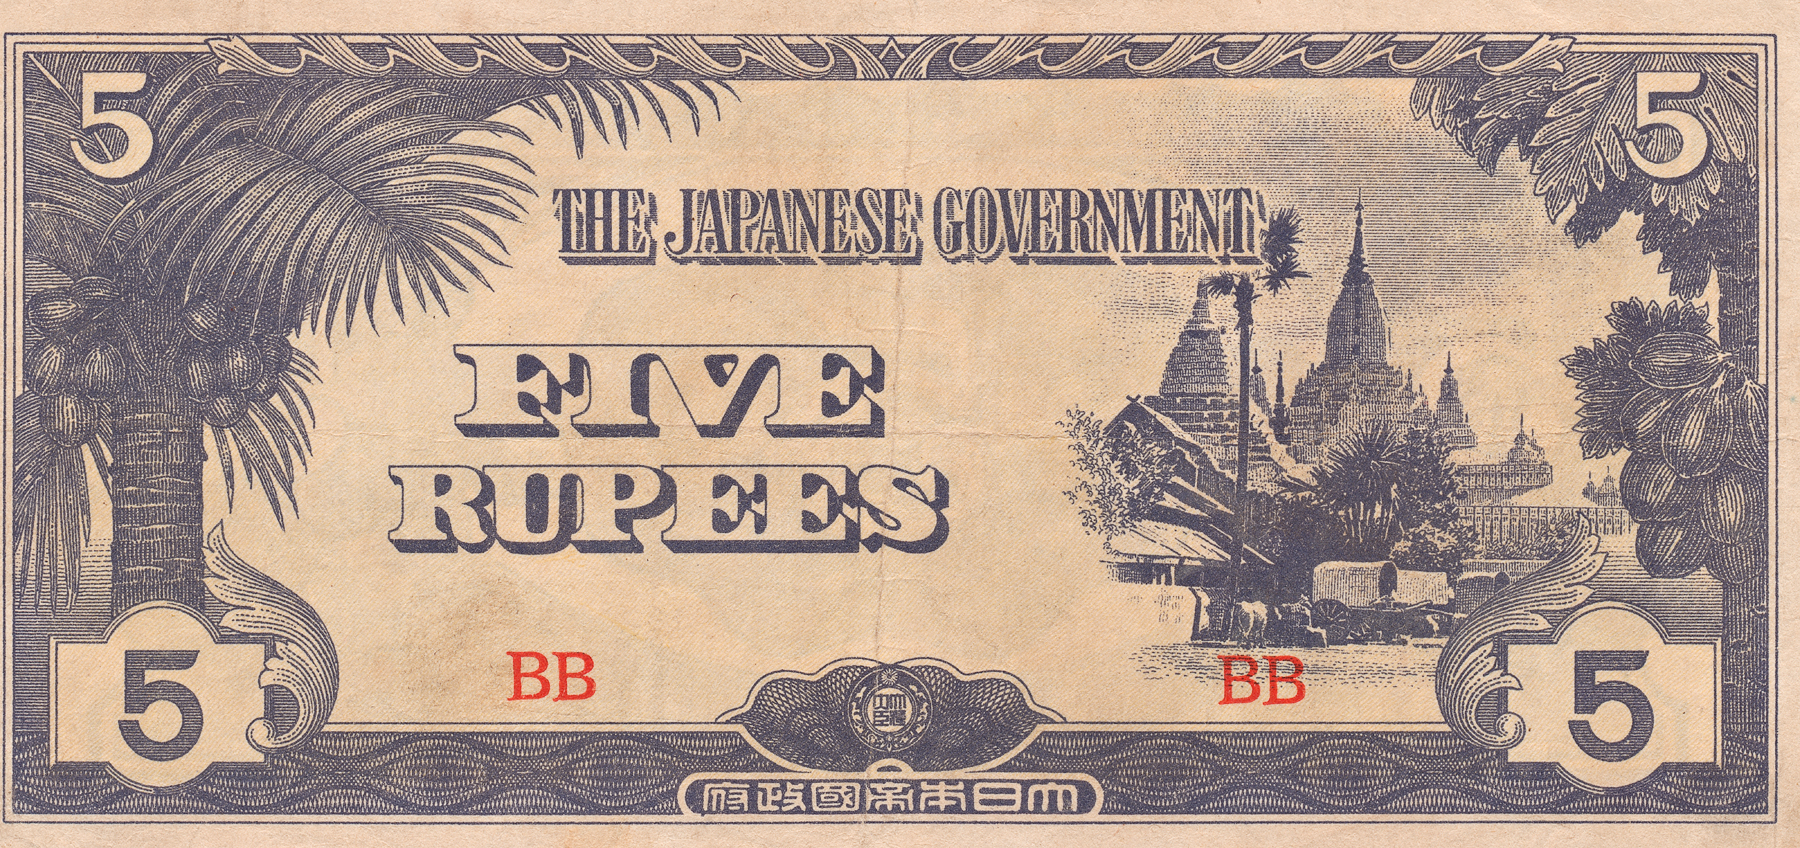 Vintage banknote - japanese government photo